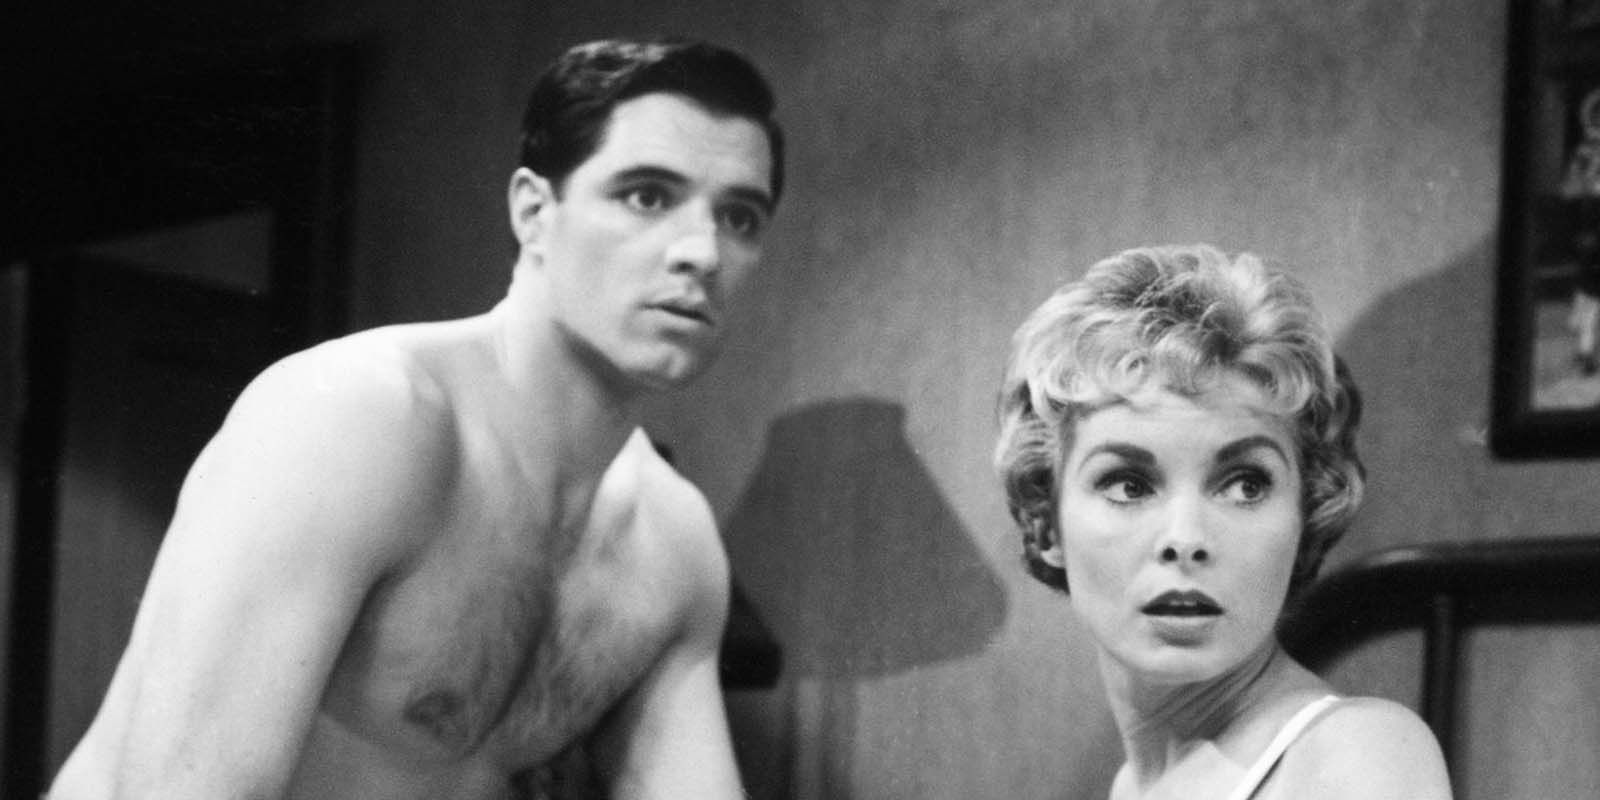 John Gavin and Janet Leigh as Sam Loomis and Marion Crane in the hotel room looking scared in Psycho.